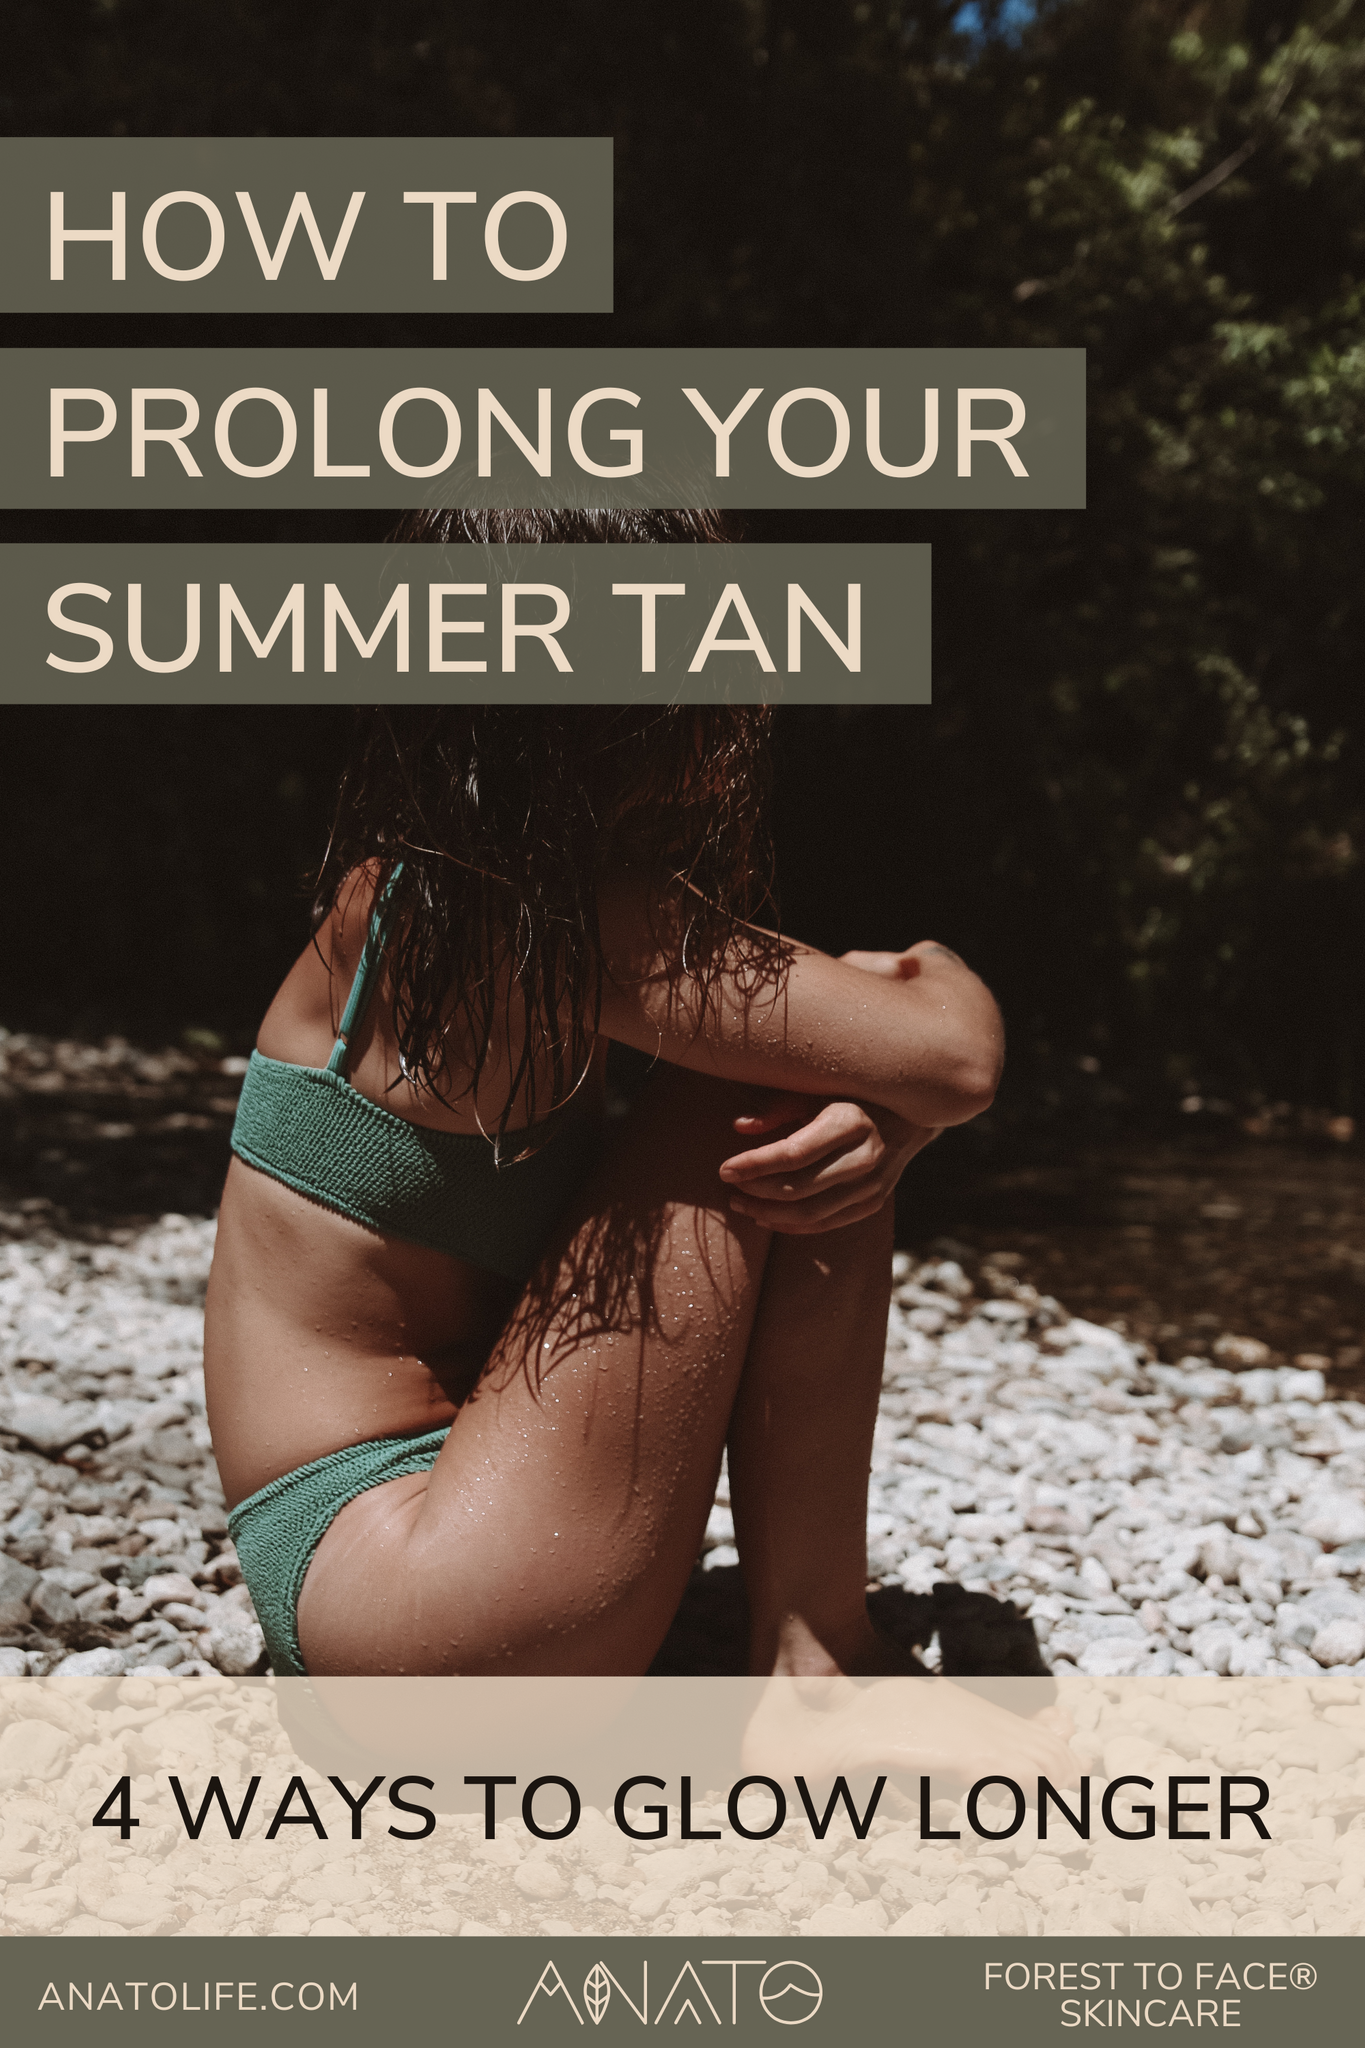 How to prolong your summer tan - Anato Life Forest to Face® Skincare